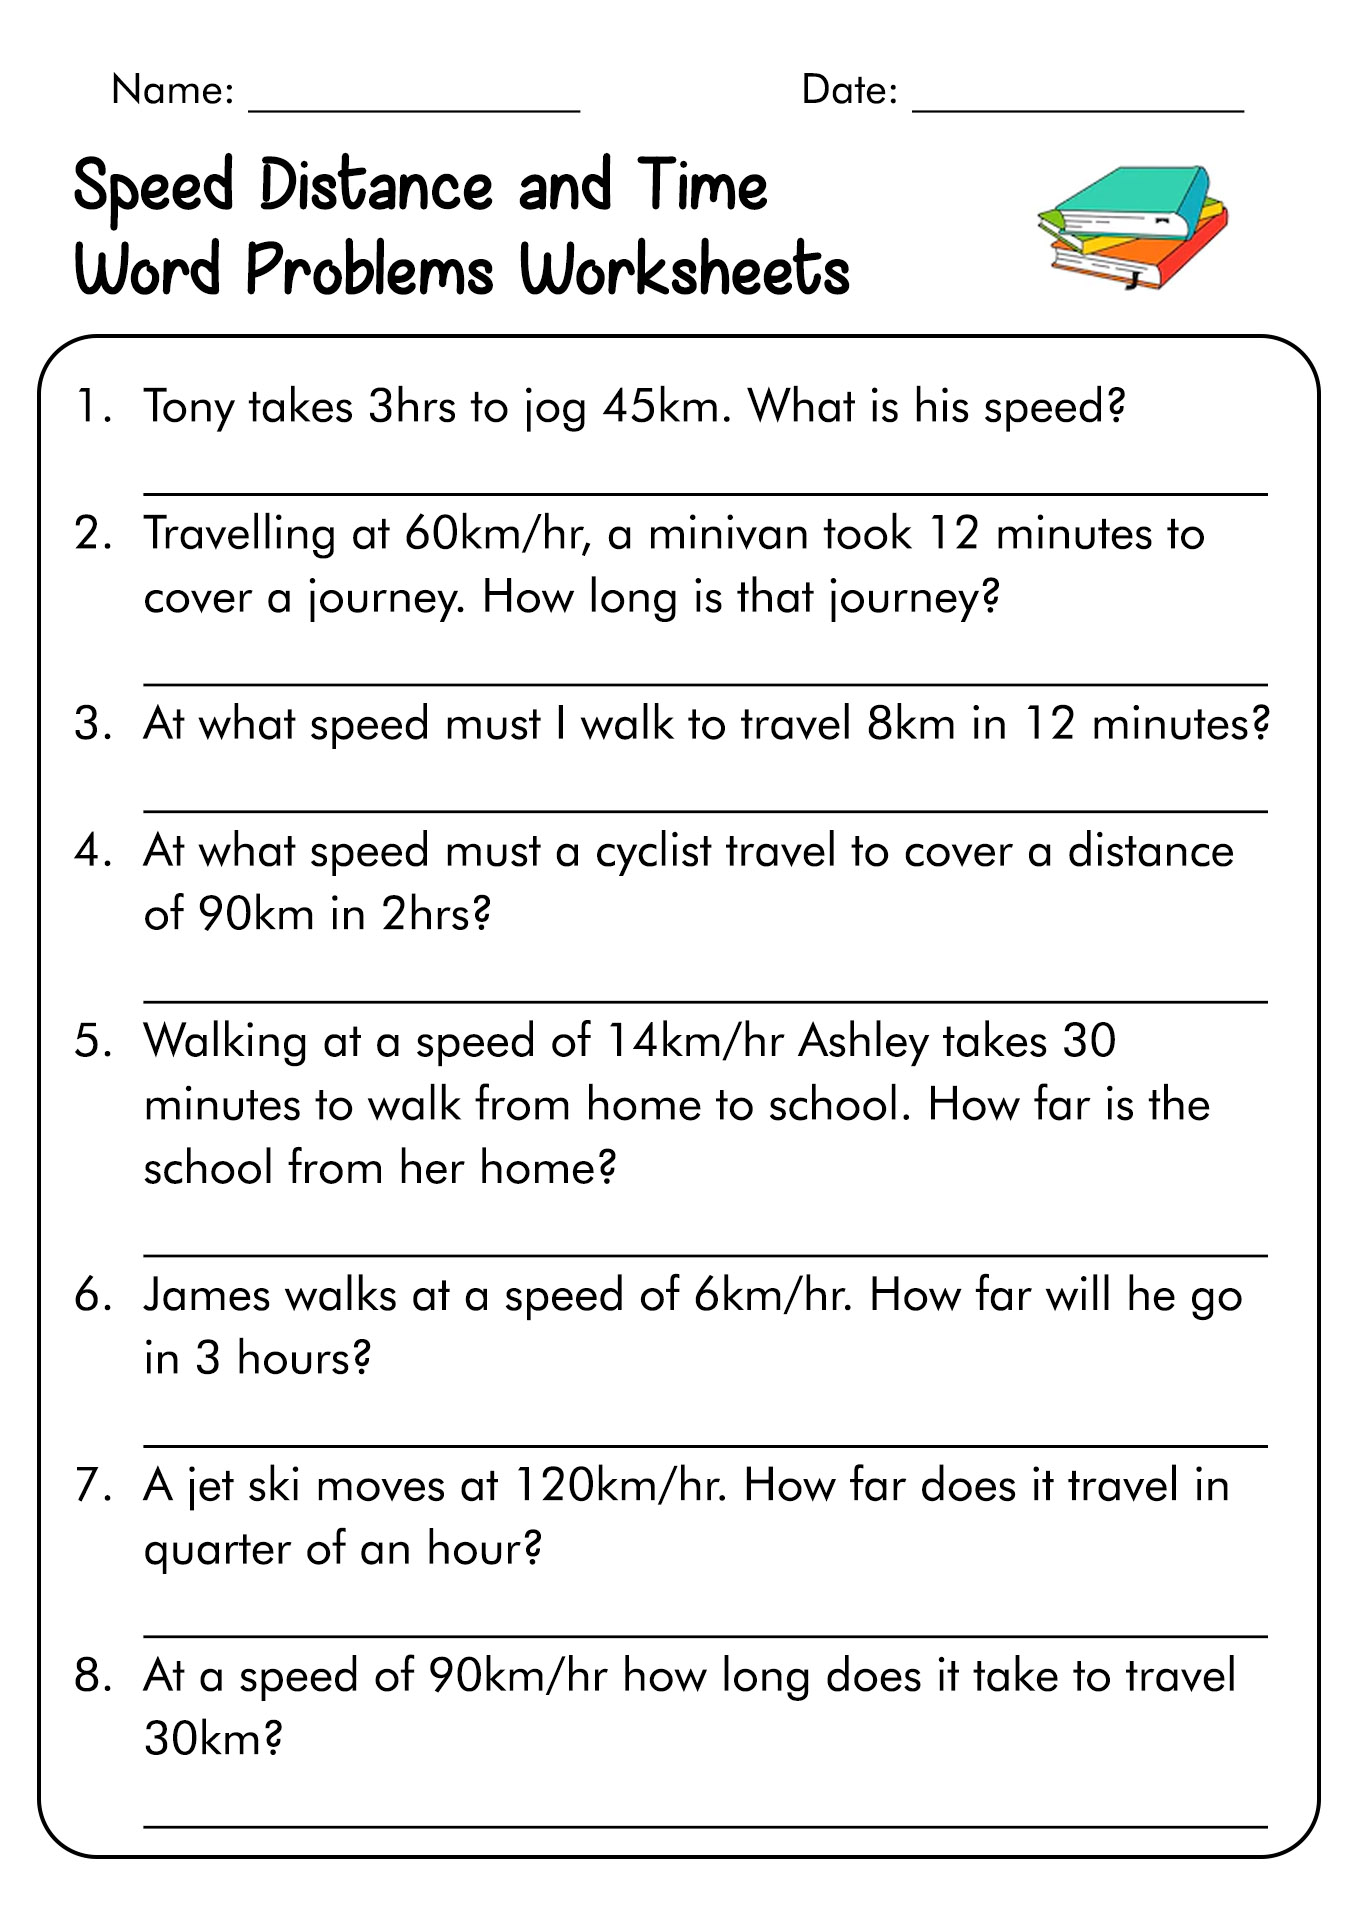 Speed Distance and Time Word Problems Worksheet